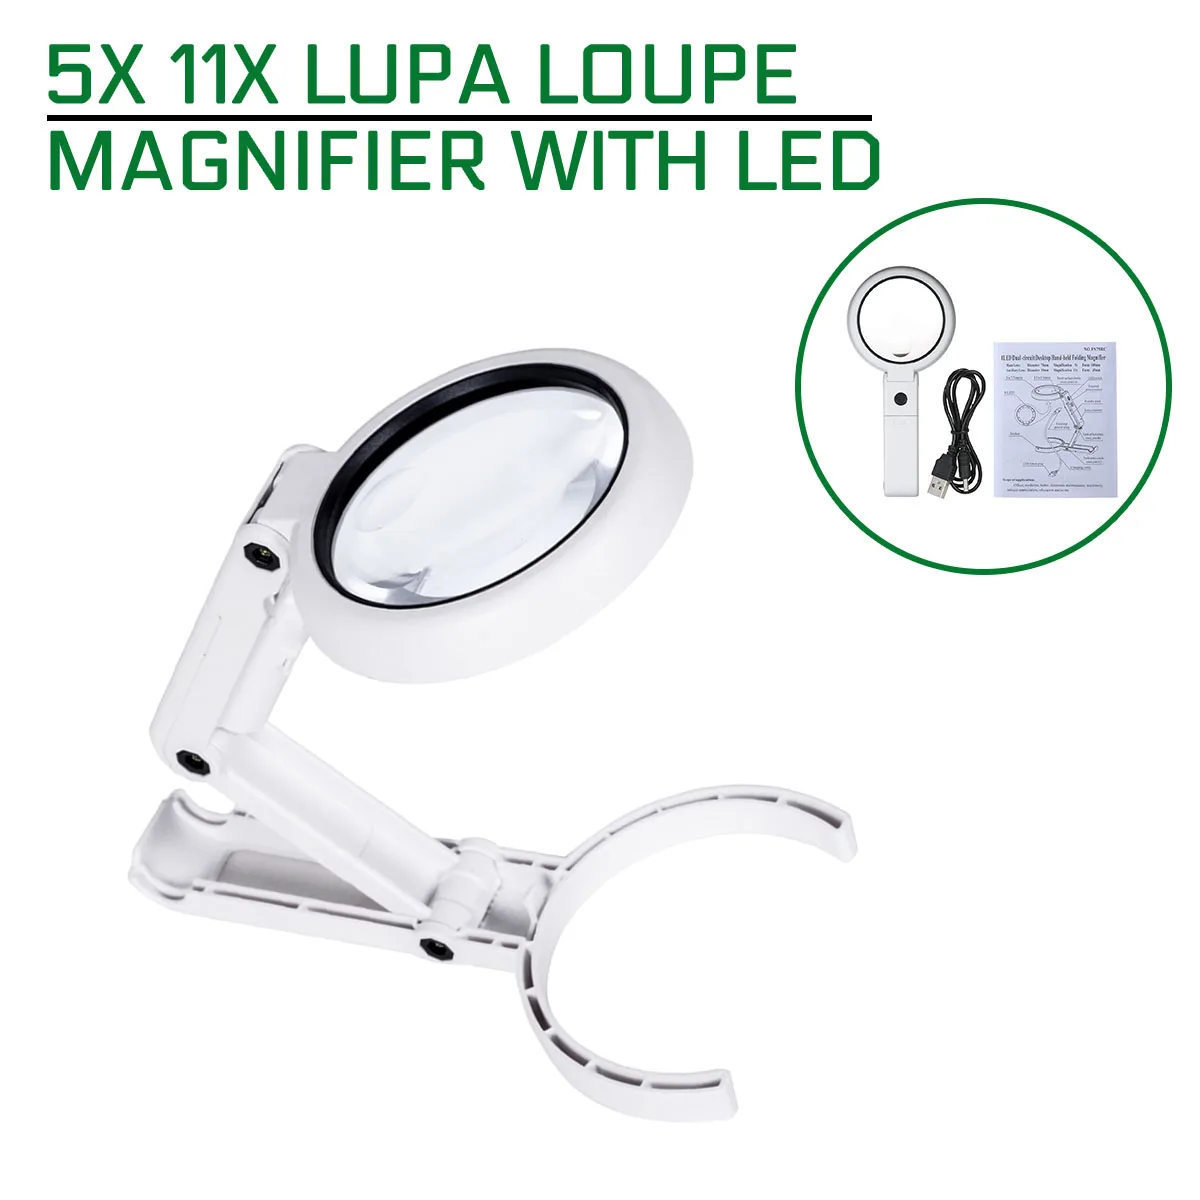 

5X 11X Lupa Loupe Magnifier Folding Lamp Reading Portable Illuminated Handheld Magnifying Glass With 8 LED Lights for Newspaper